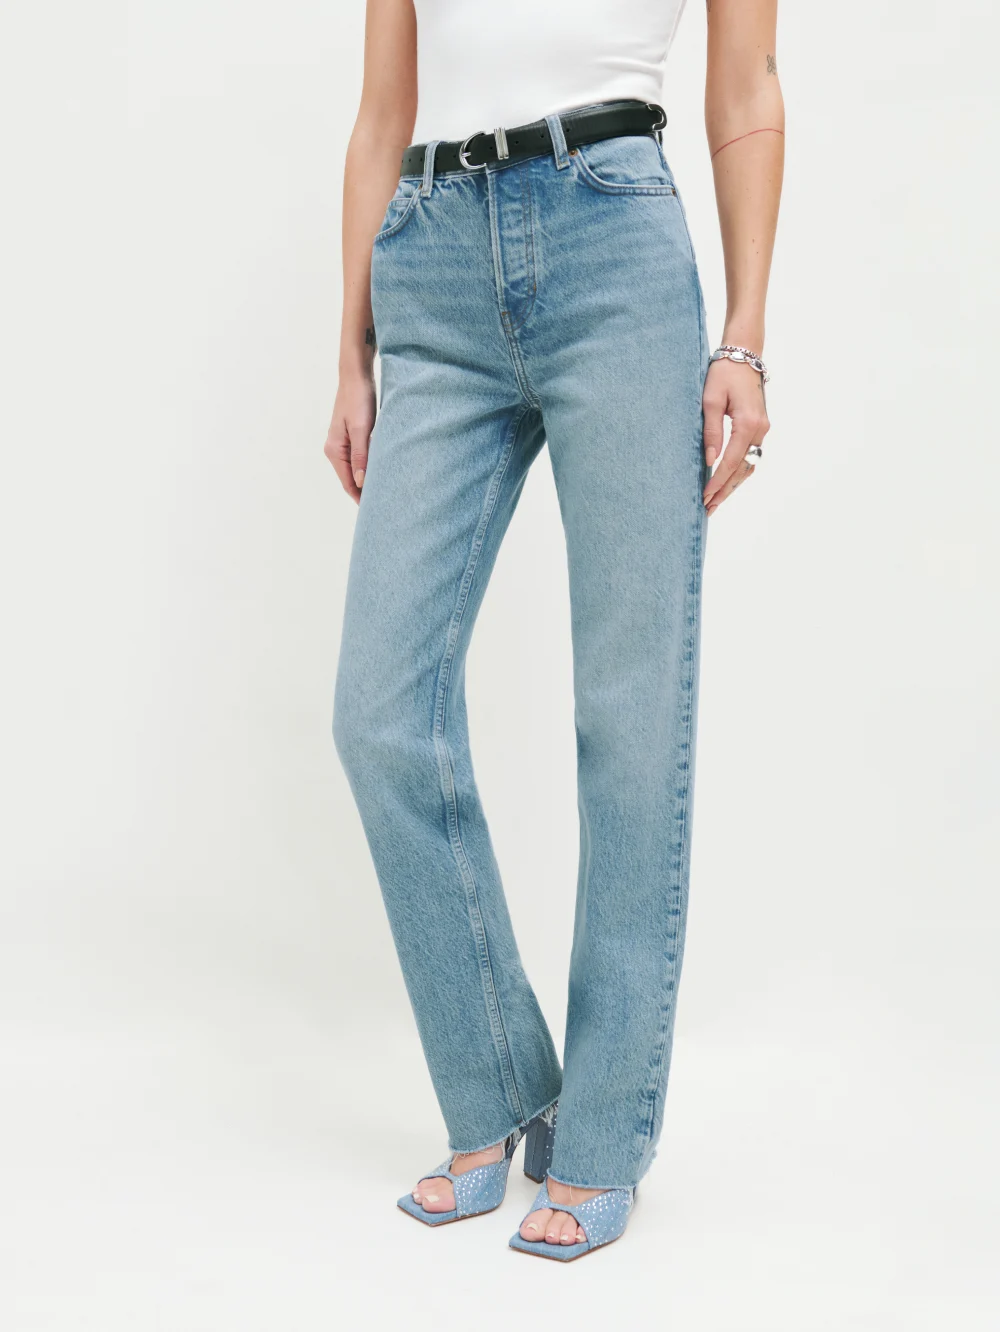 Best Deals for Tapered Leg Jeans Definition